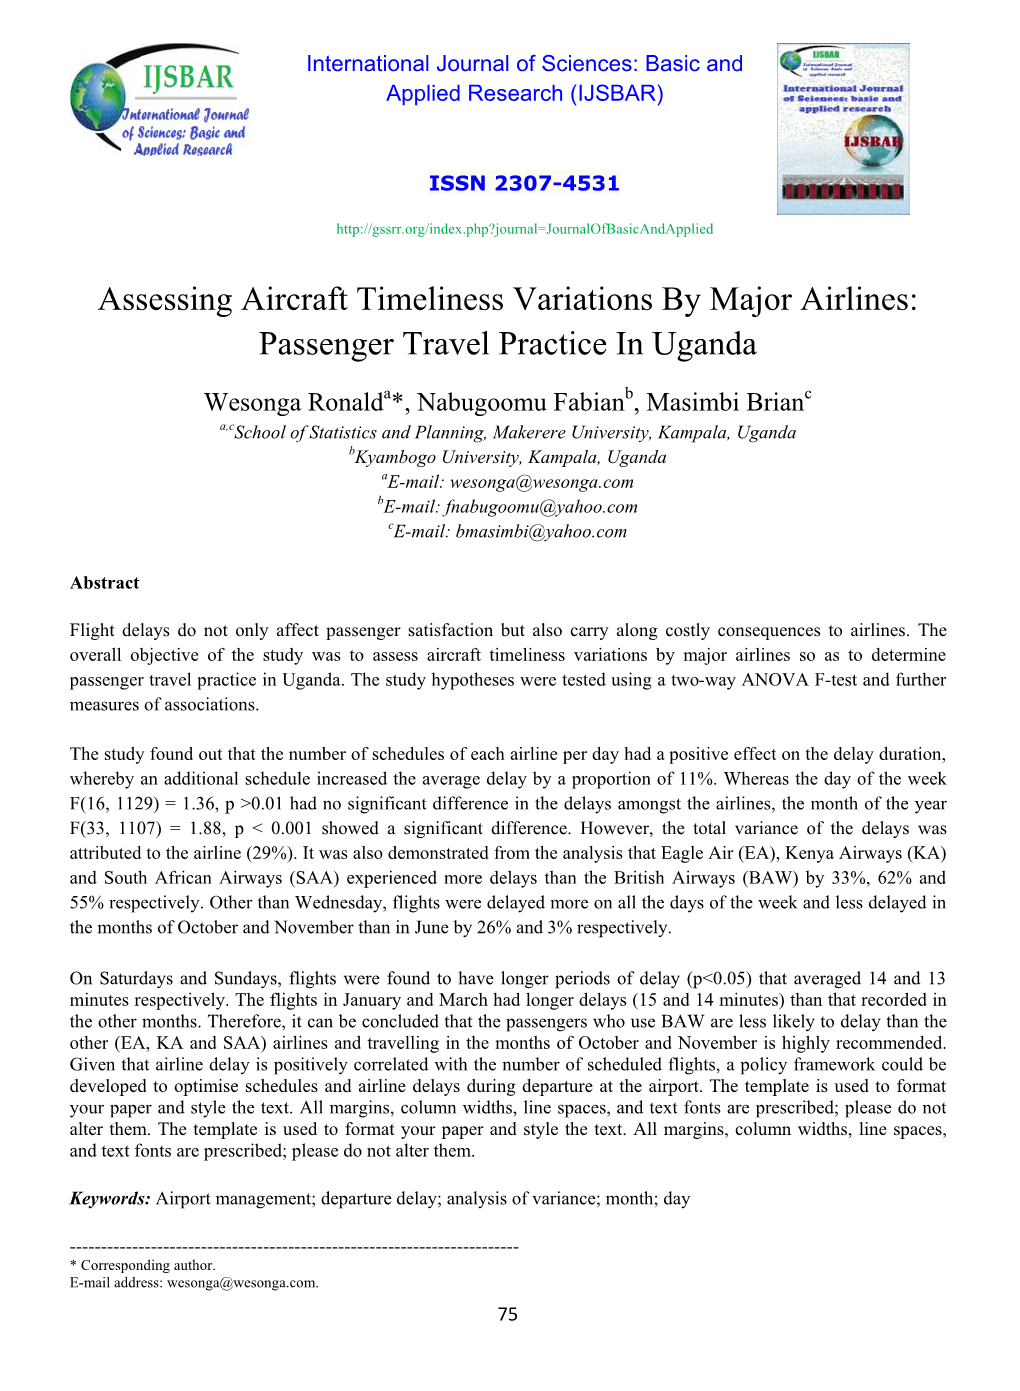 Assessing Aircraft Timeliness Variations by Major Airlines: Passenger Travel Practice in Uganda